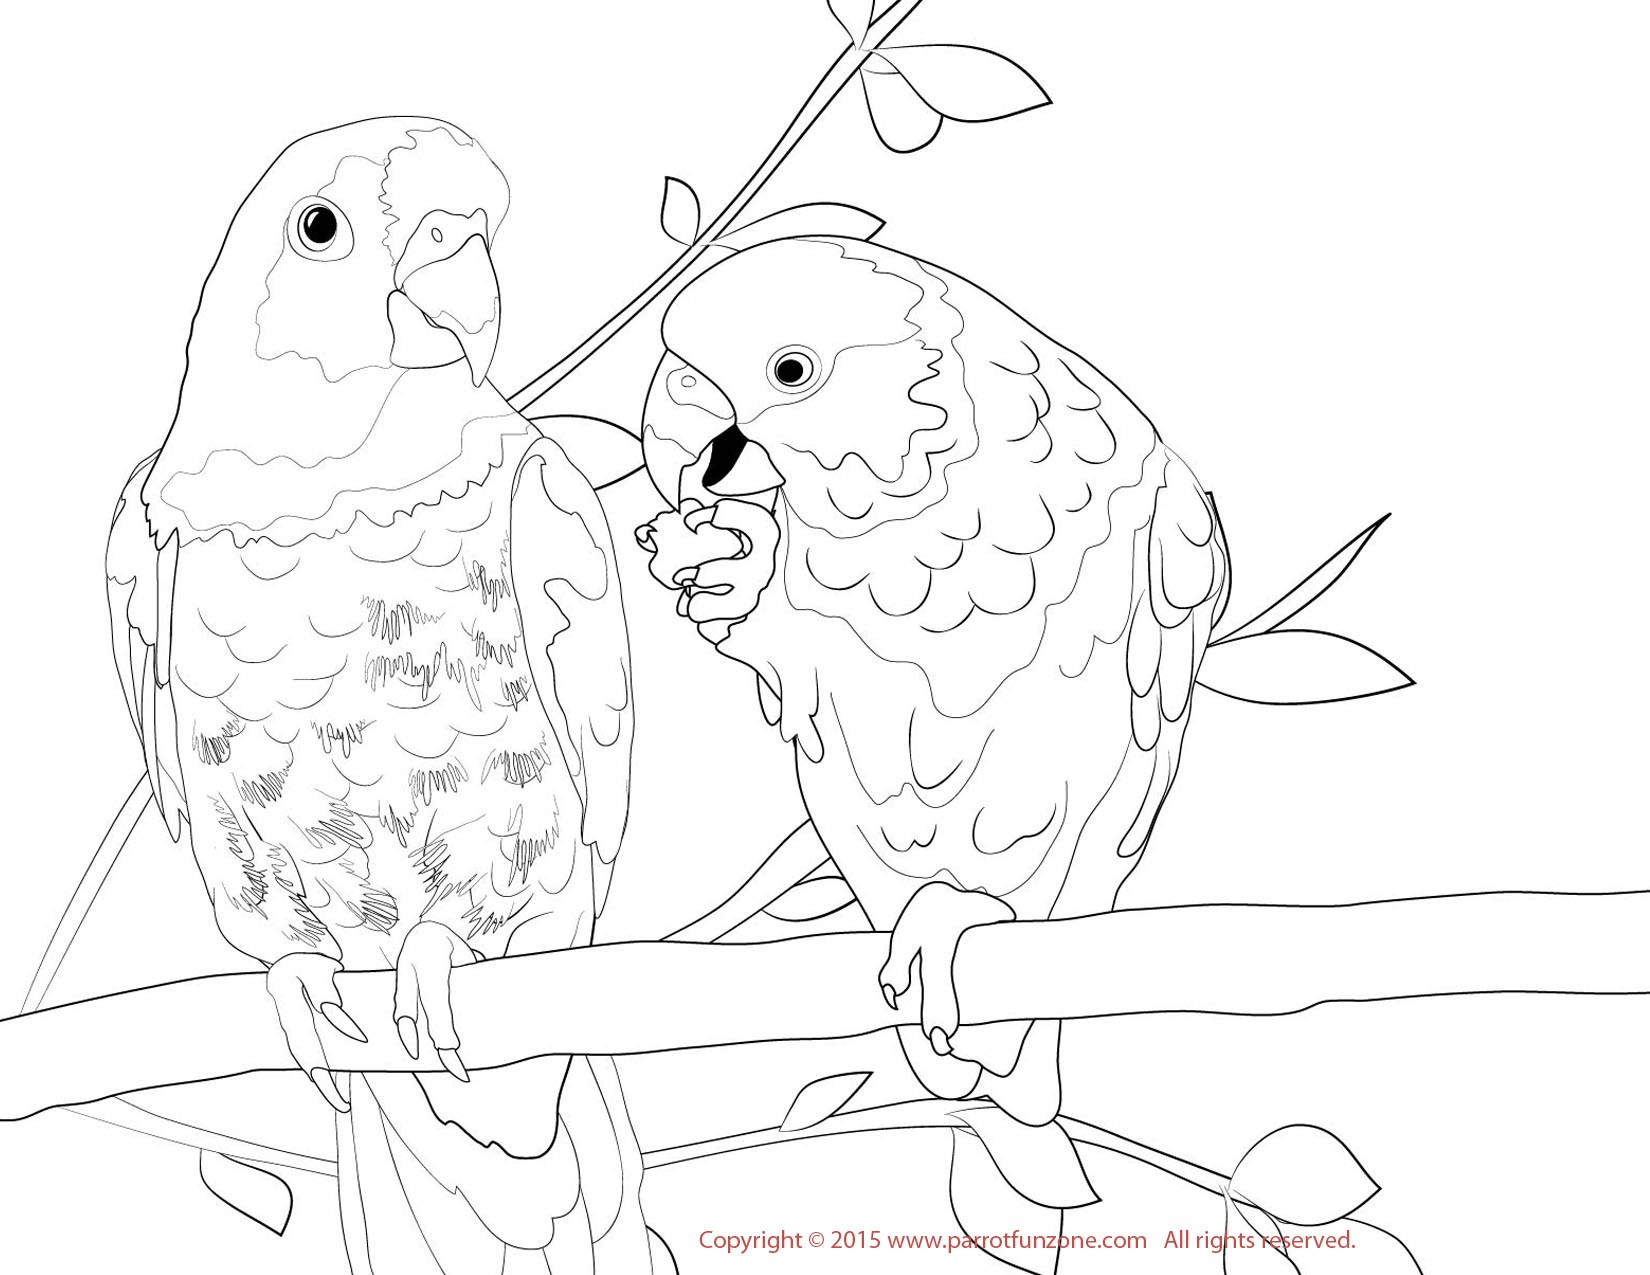 Love Bird Coloring Pages at GetDrawings.com | Free for personal use